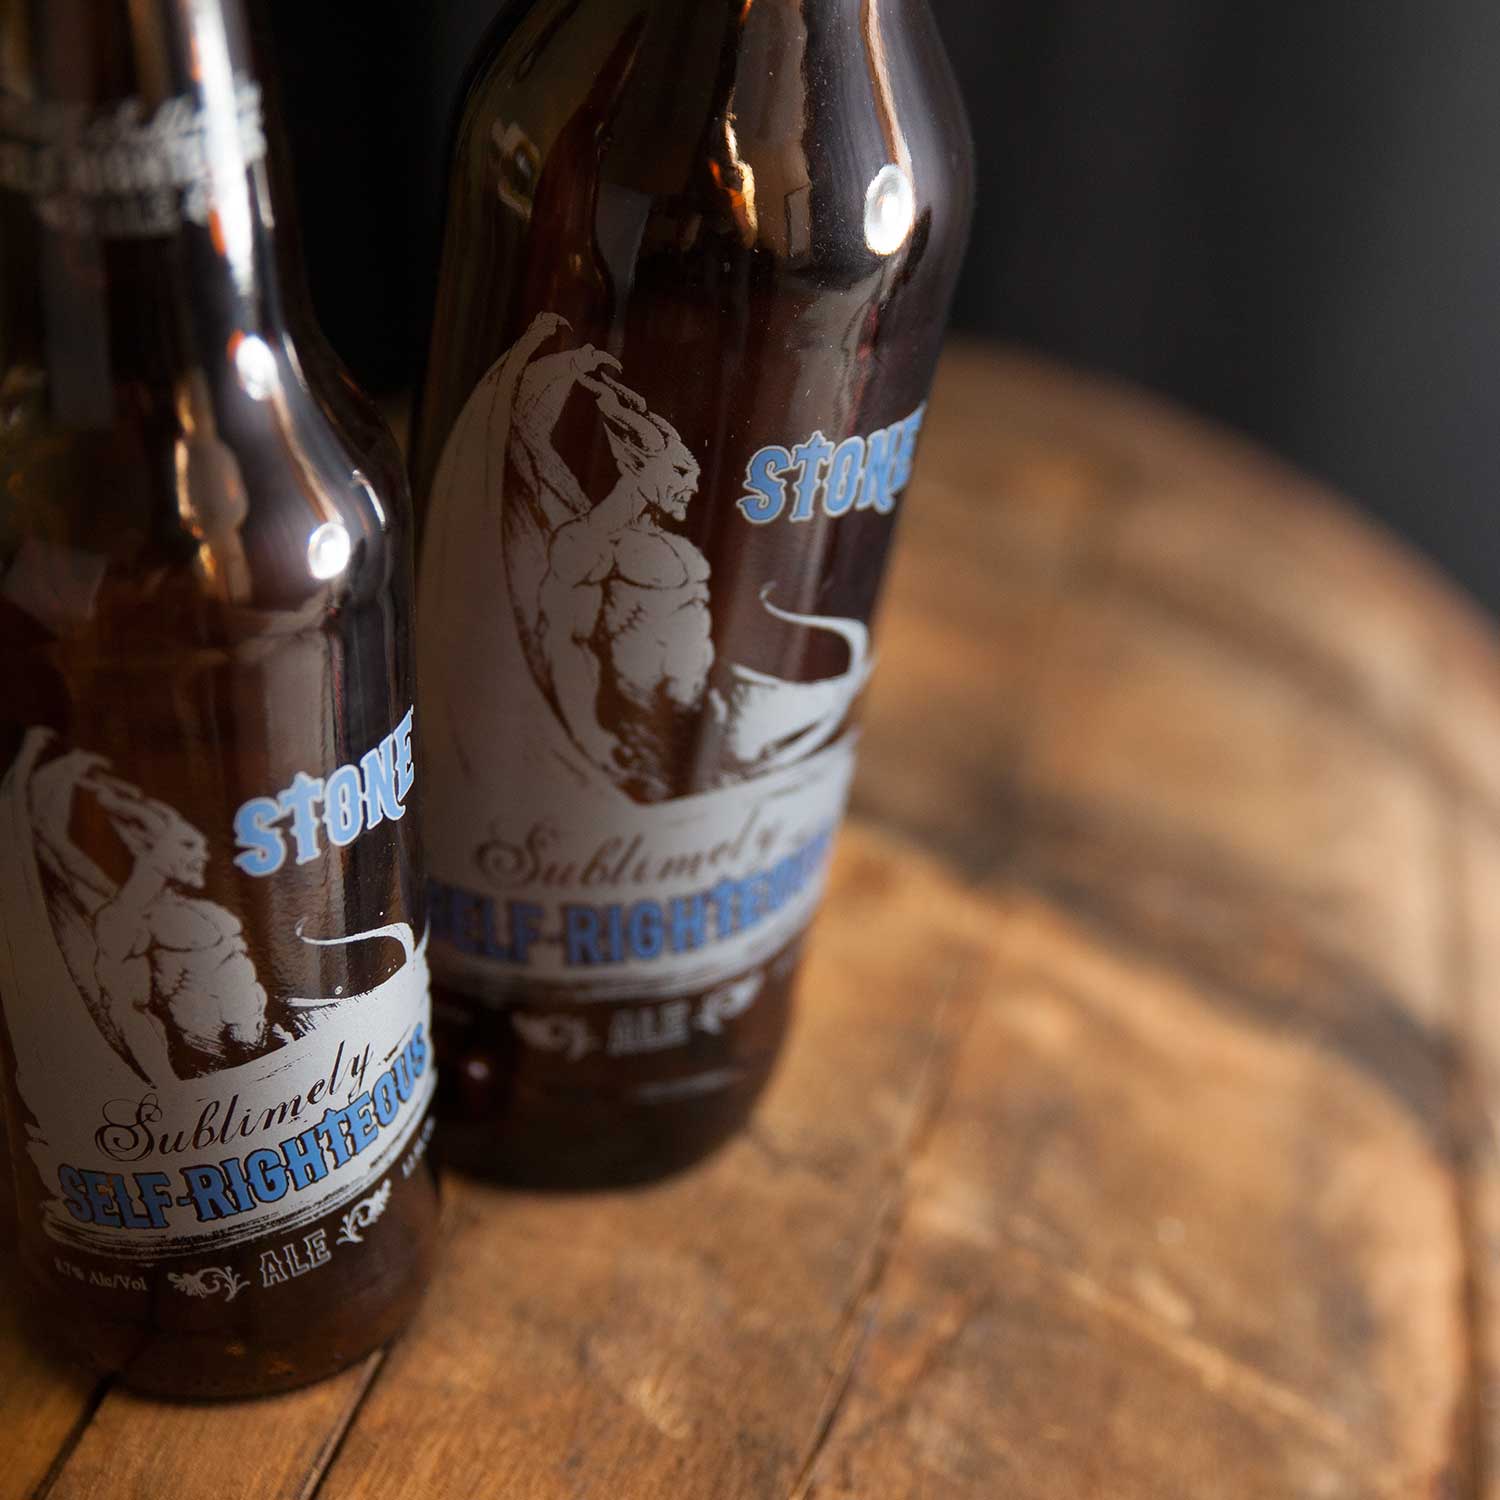 Bottles of Stone Sublimely Self-Righteous Ale on a barrel